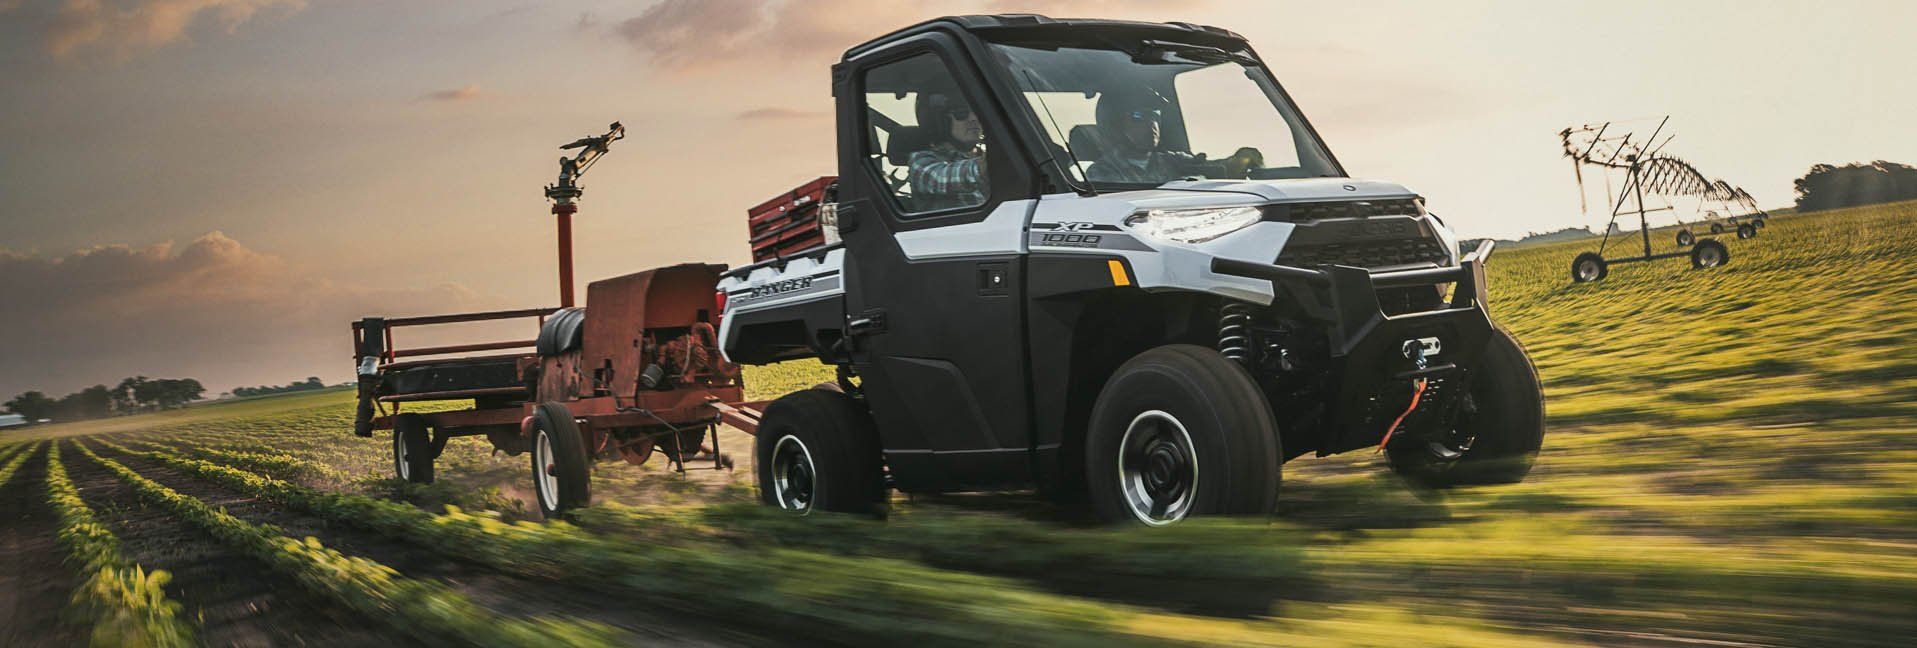 Polaris' Industry-Leading 2019 Off-Road Vehicle Lineup